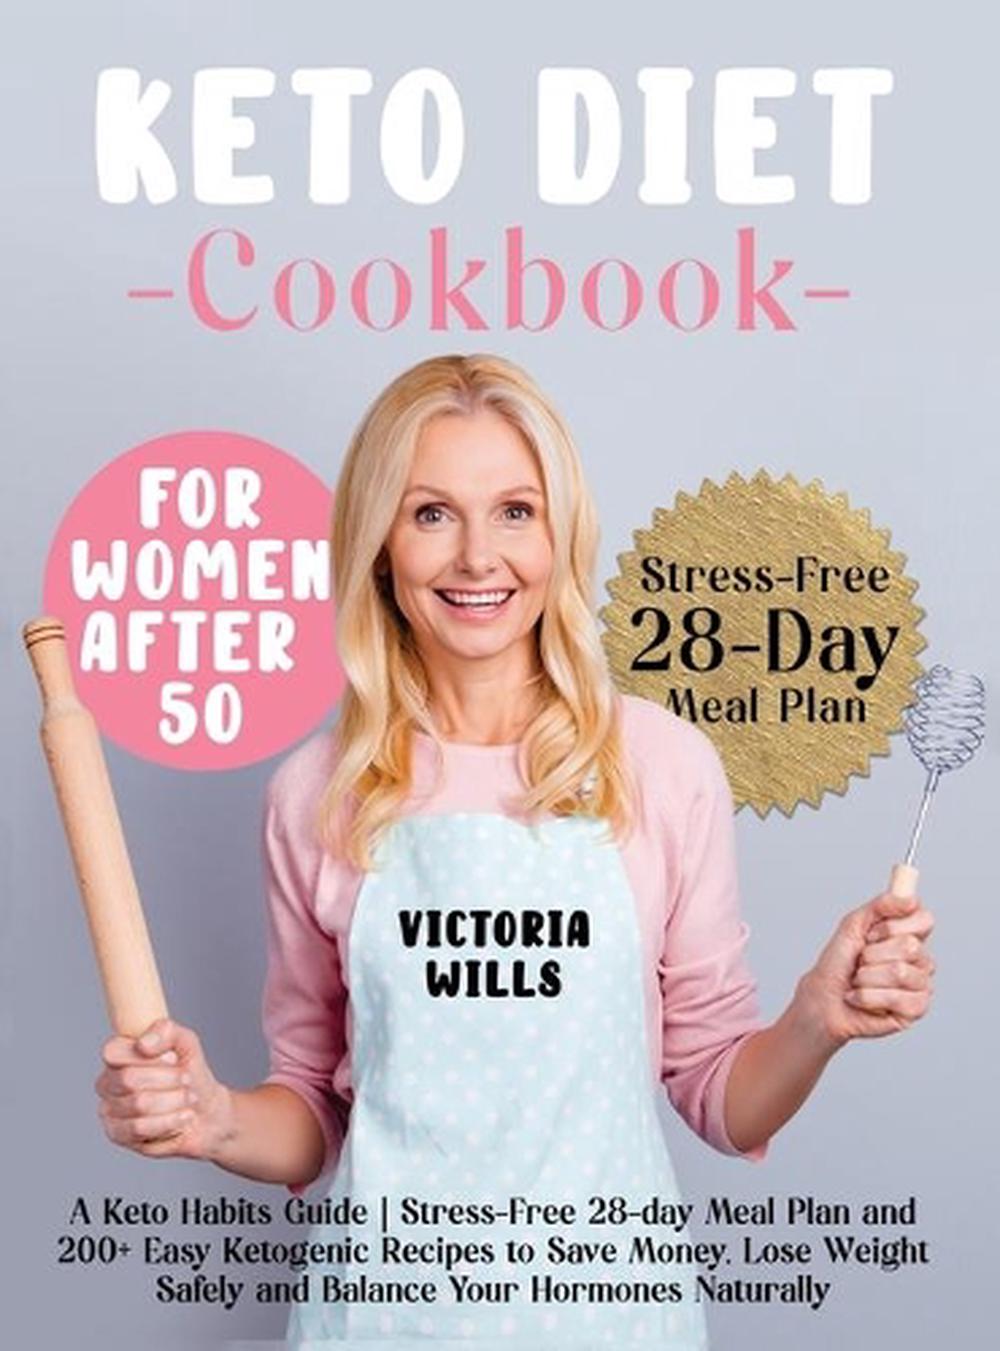 Easy Keto Diet Cookbook for Women After 50 by Victoria Wills (English ...